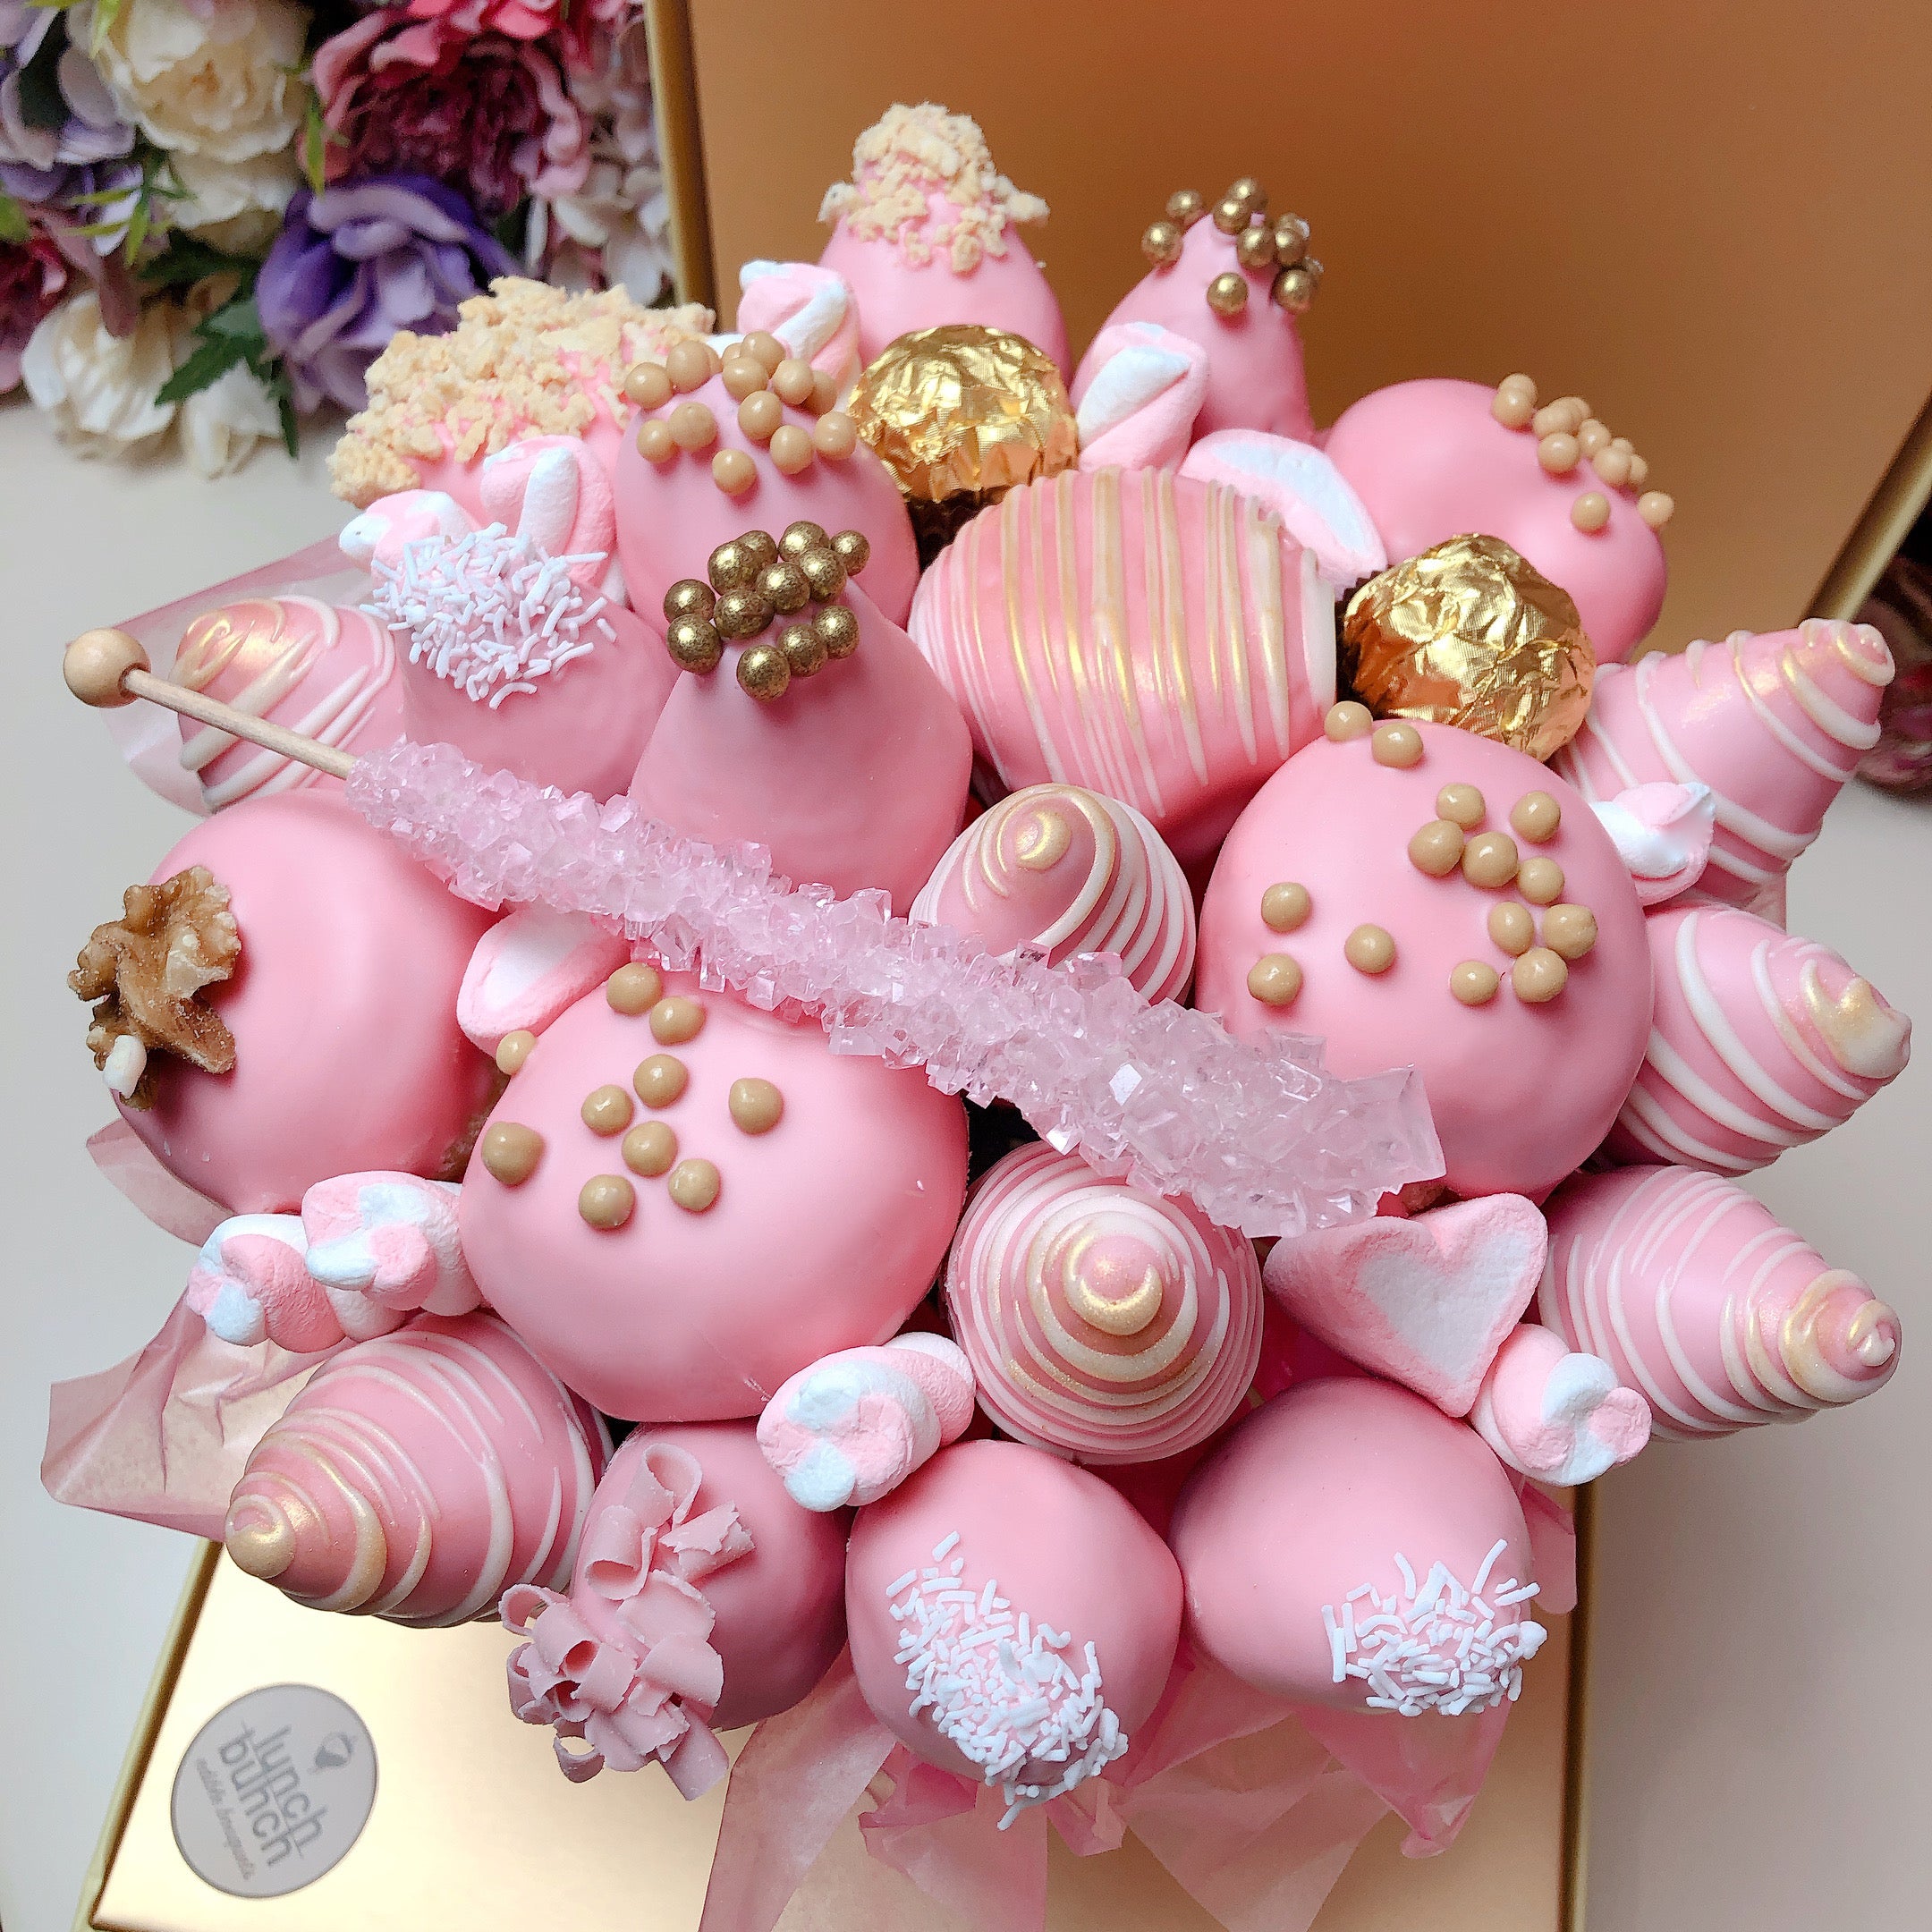 Female Present of chocolate covered strawberries and donut bouquet. Same day delivery gift